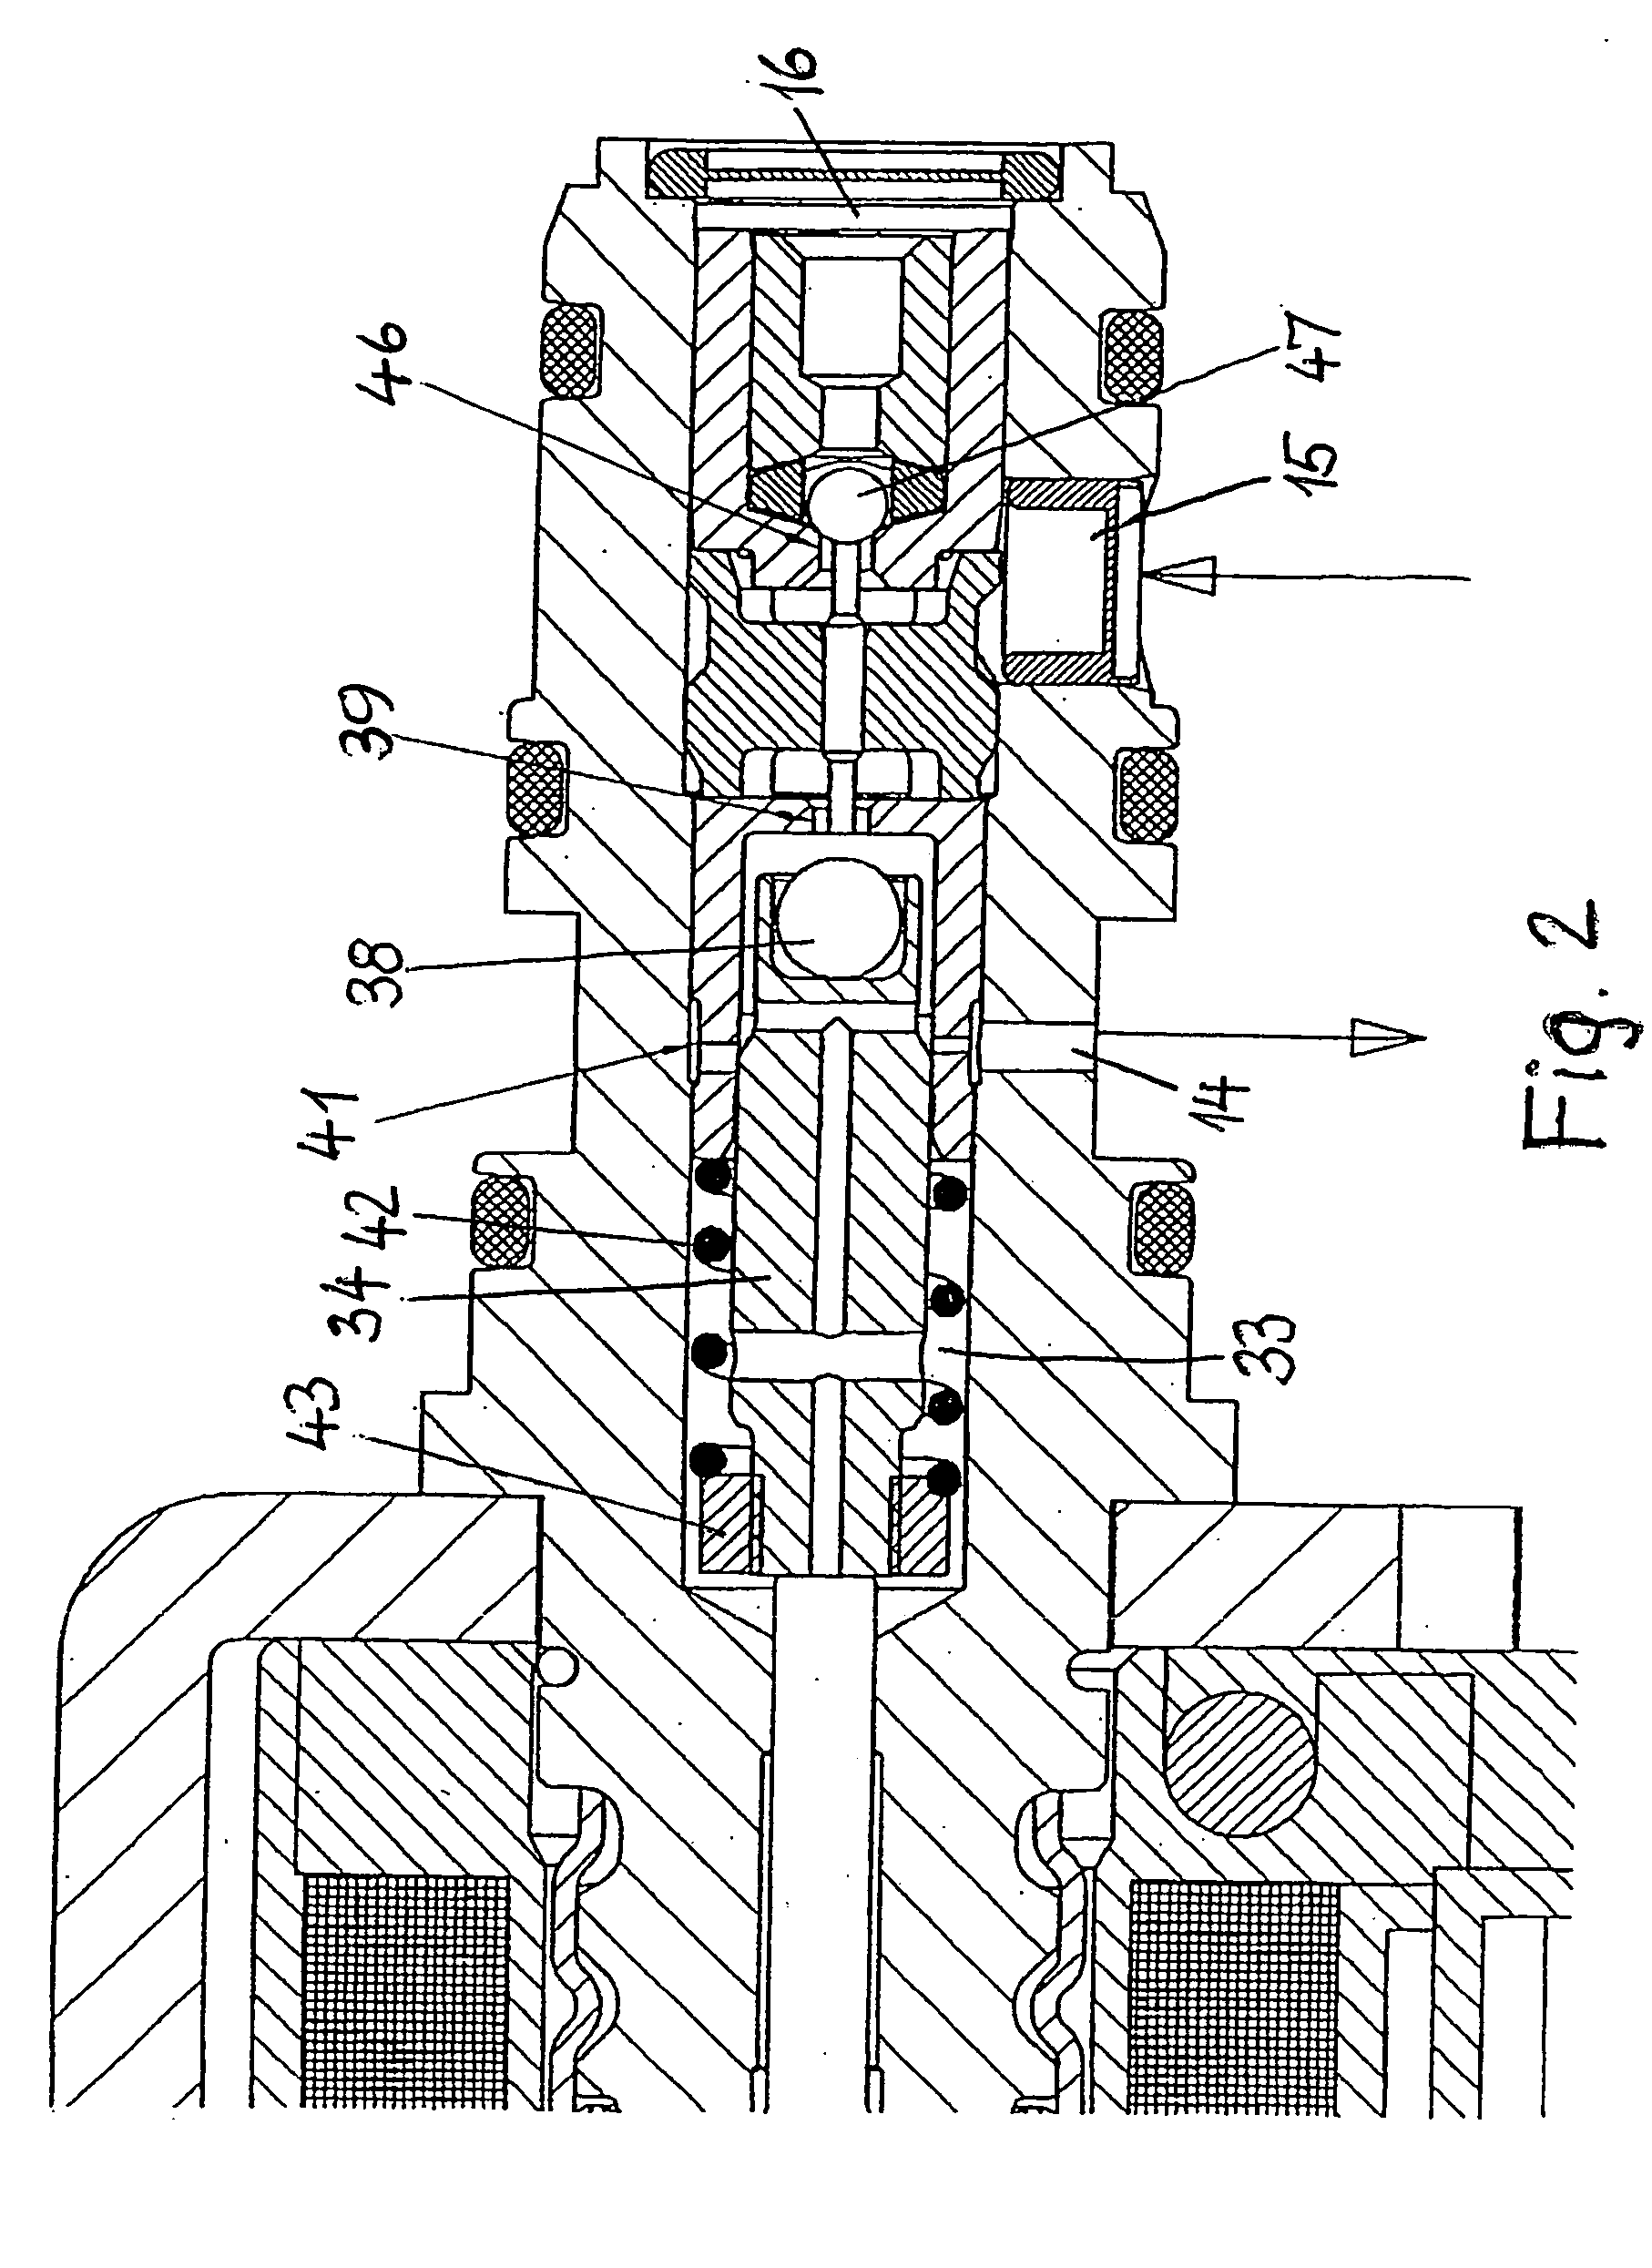 Controllable solenoid valve